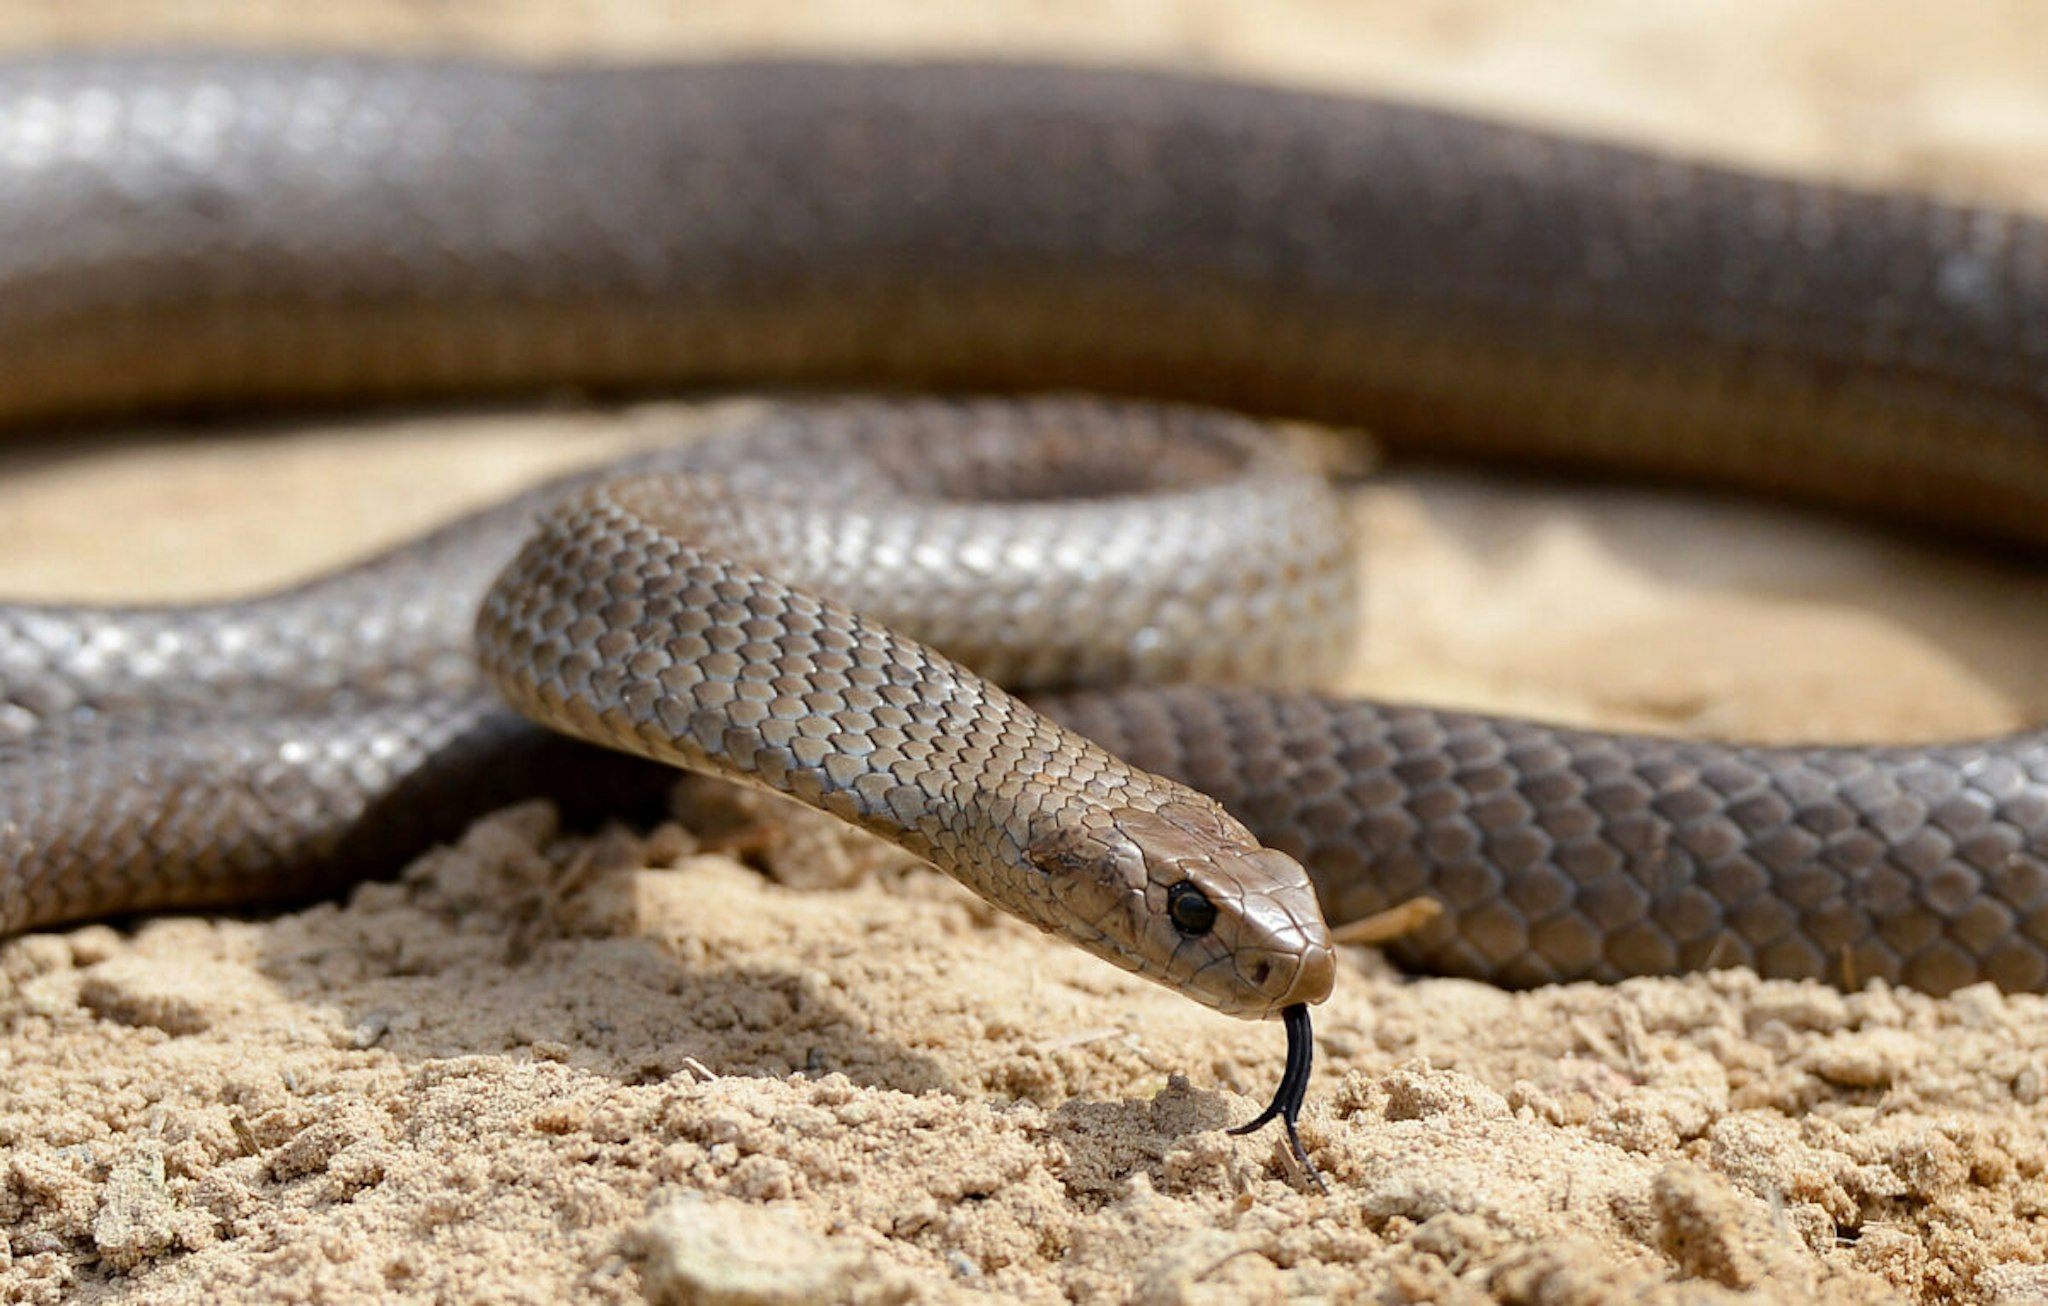 A deadly Australia eastern brown snake -- which has enough venom to kill 20 adults with a single bite -- is photographed in the Sydney suburb of Terrey Hills on September 25, 2012., in the Sydney on October 3, 2012.